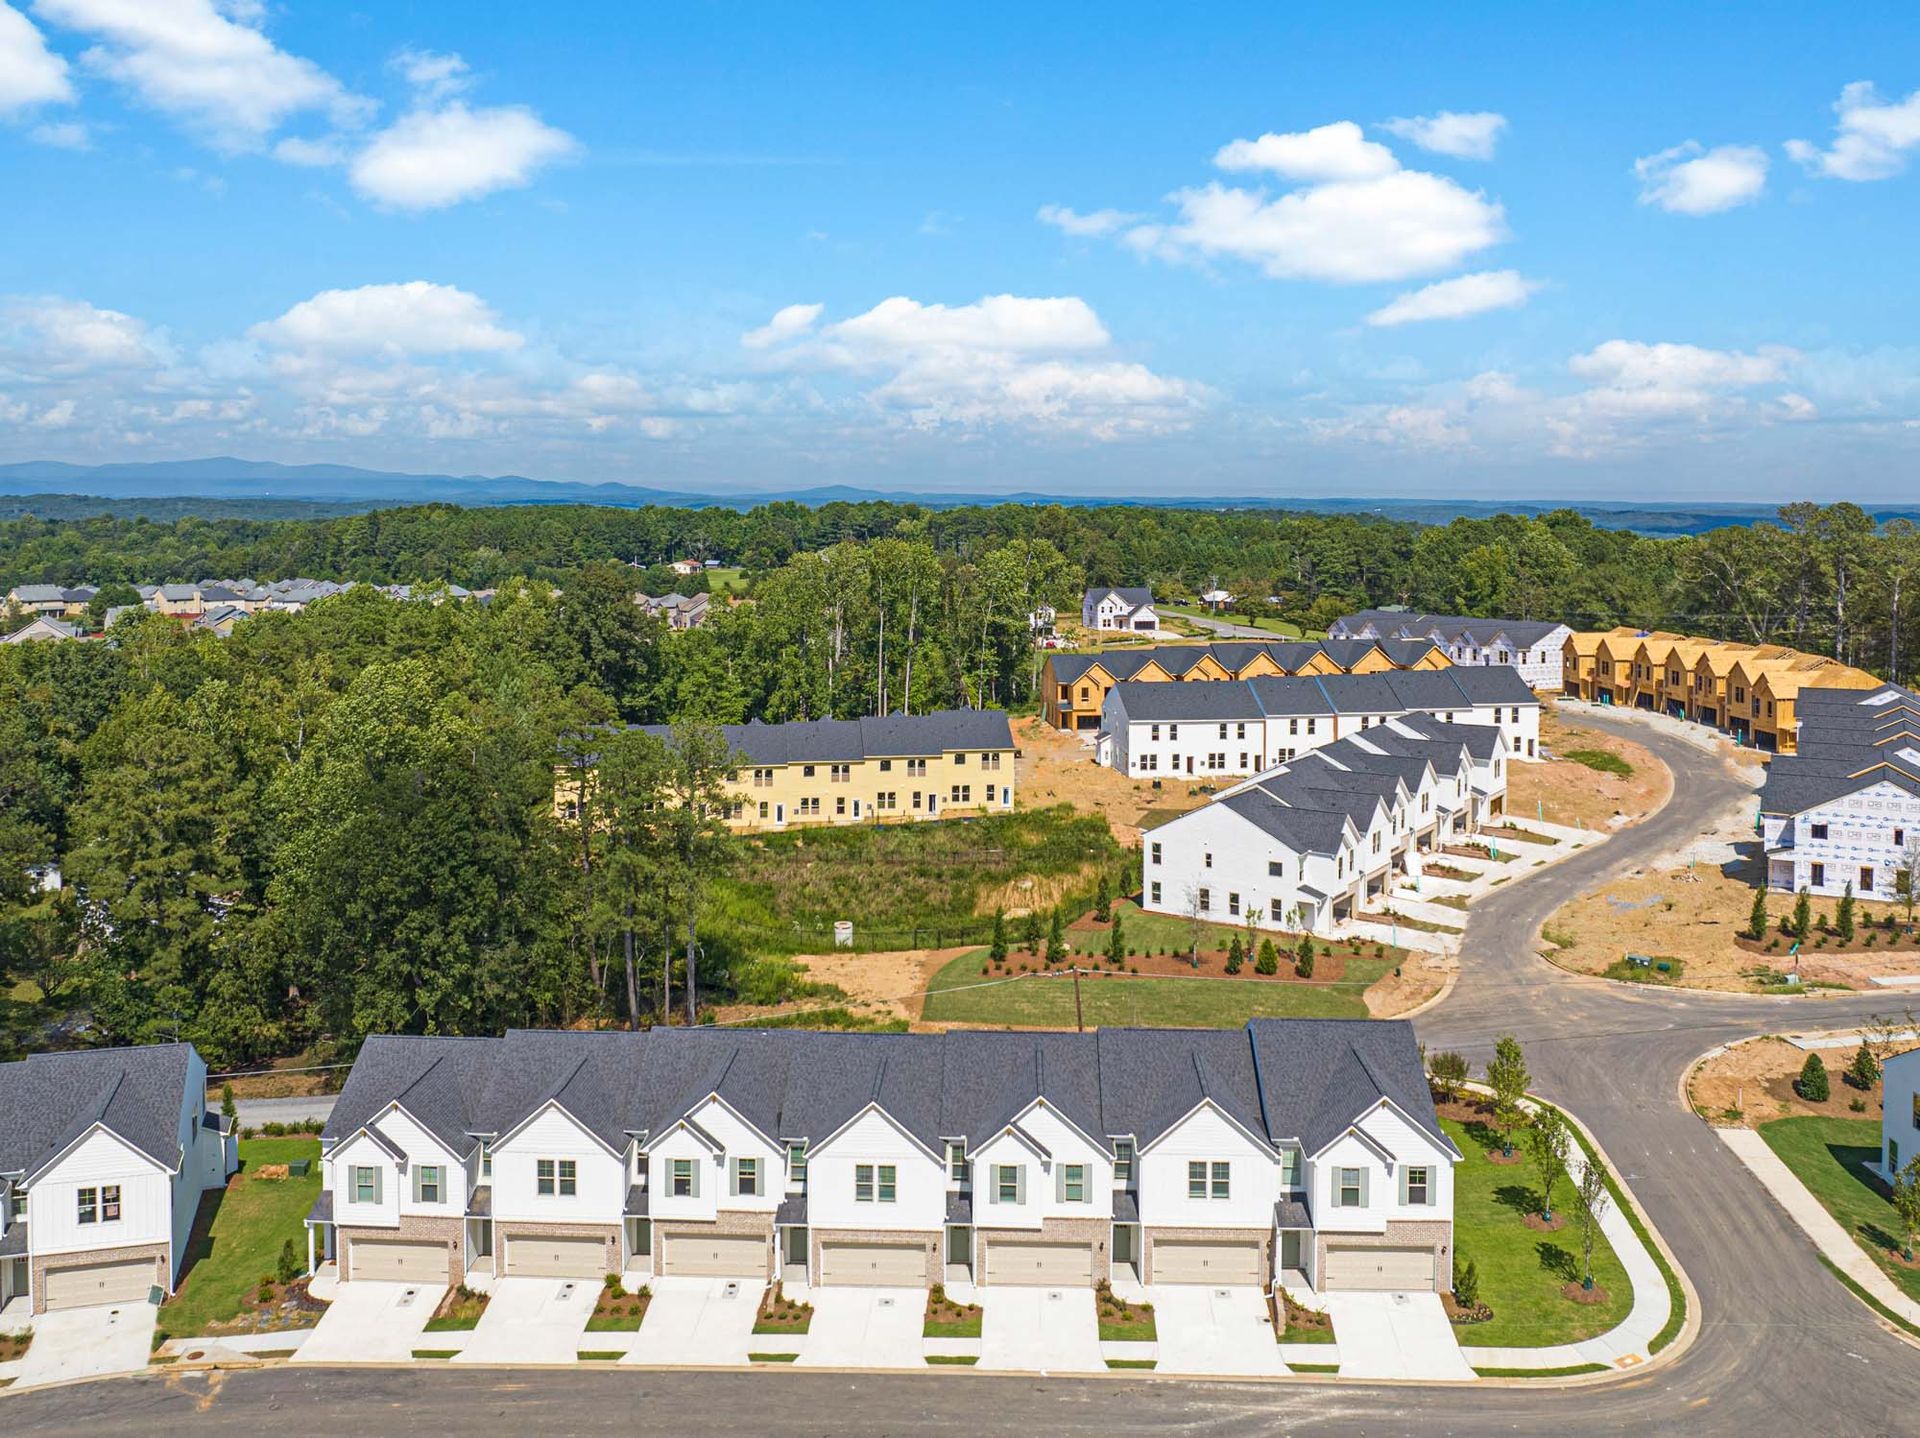 An aerial view of a row of houses in a residential area at Mayridge Canton FKA Summerwalk Townhomes